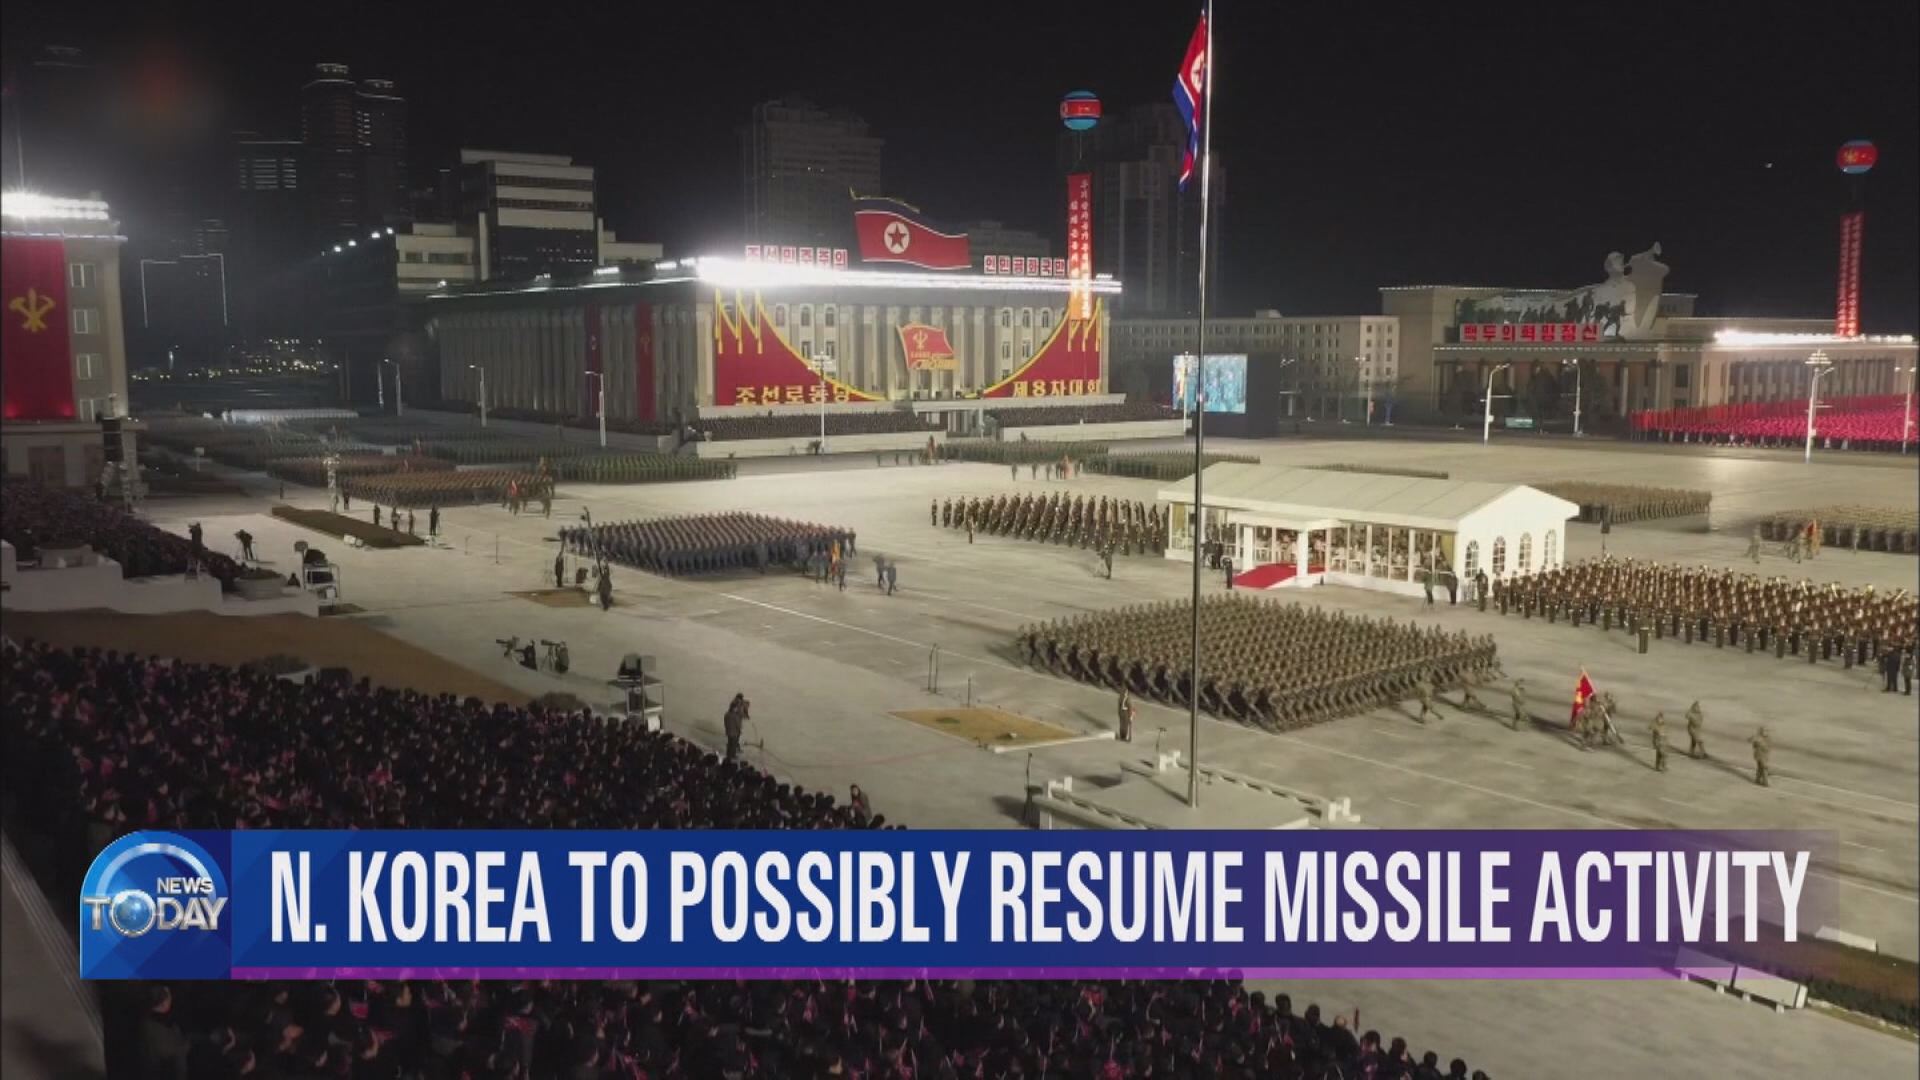 N. KOREA TO POSSIBLY RESUME MISSILE ACTIVITY